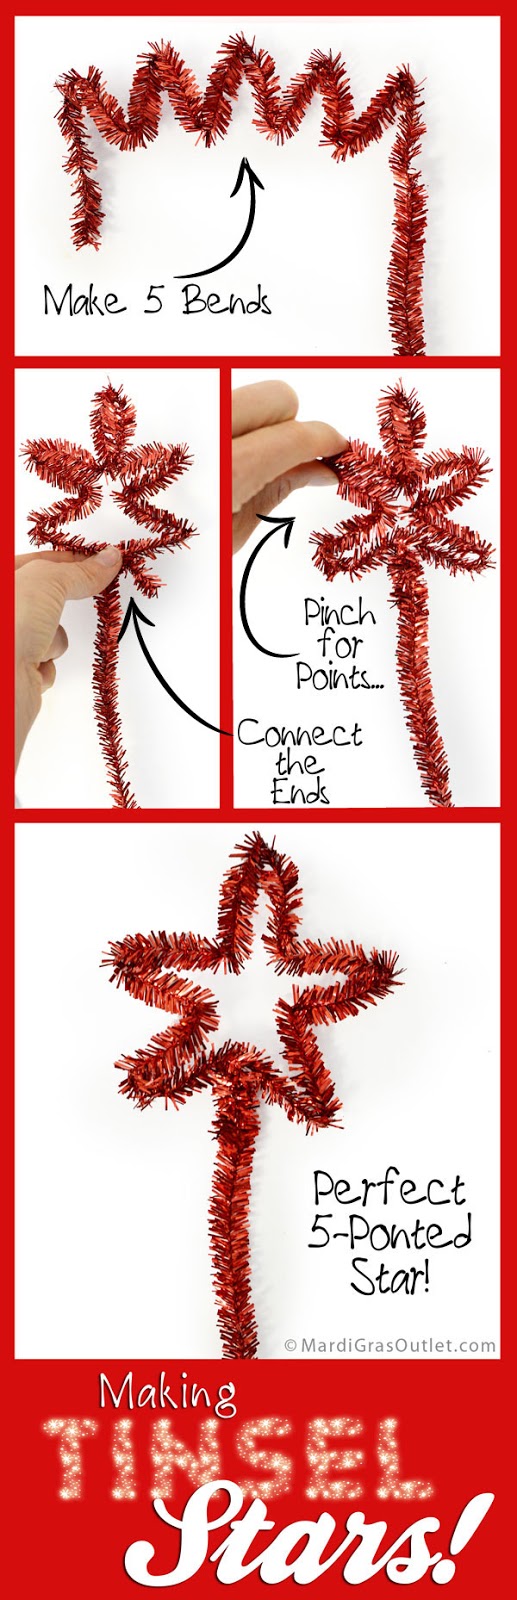 How to Make a Tinsel Star | Tutorial by MardiGrasOutlet.com